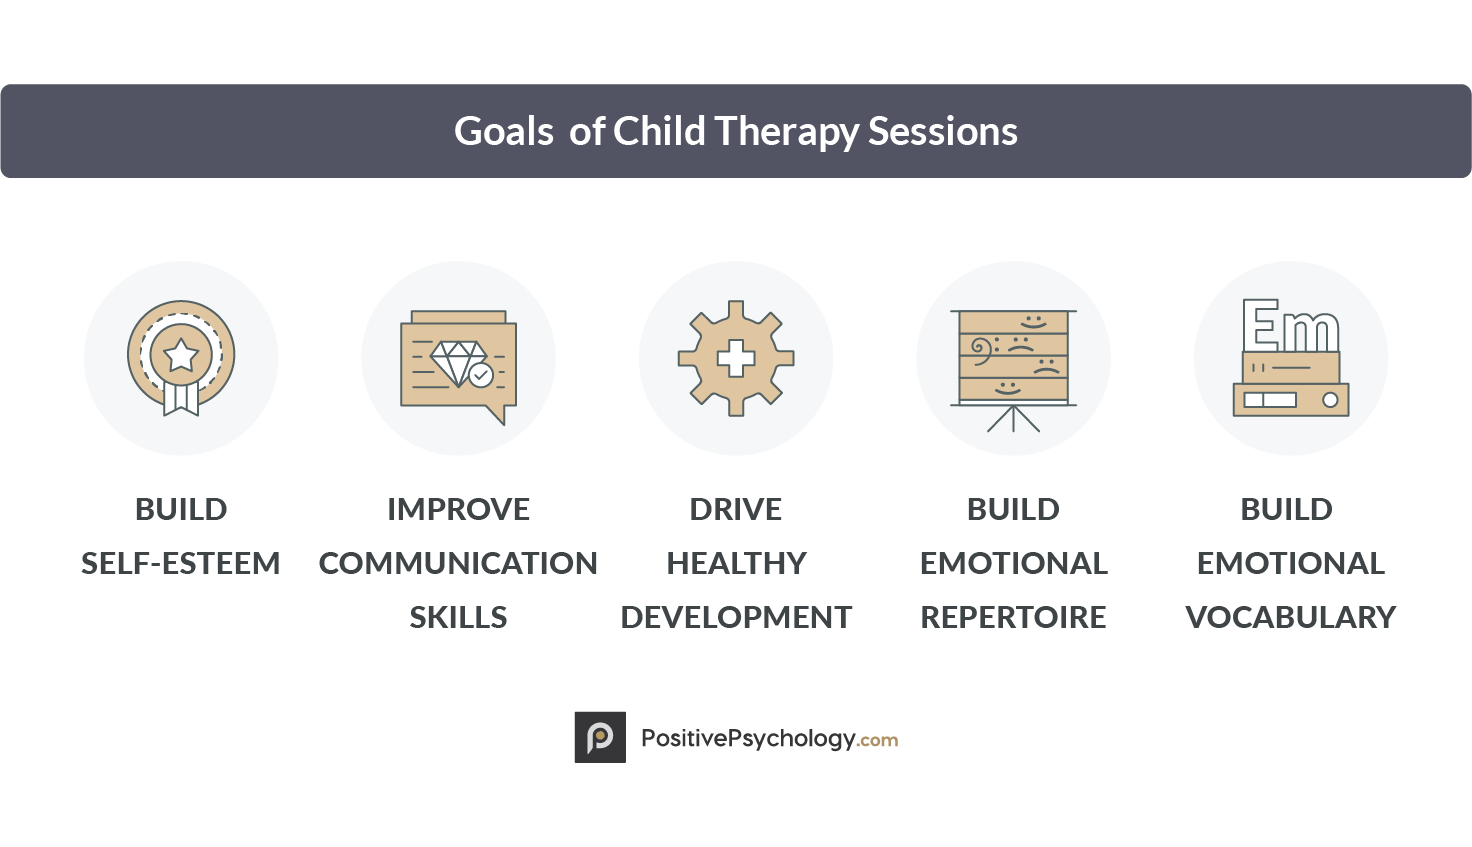 Goals of Child Therapy Sessions